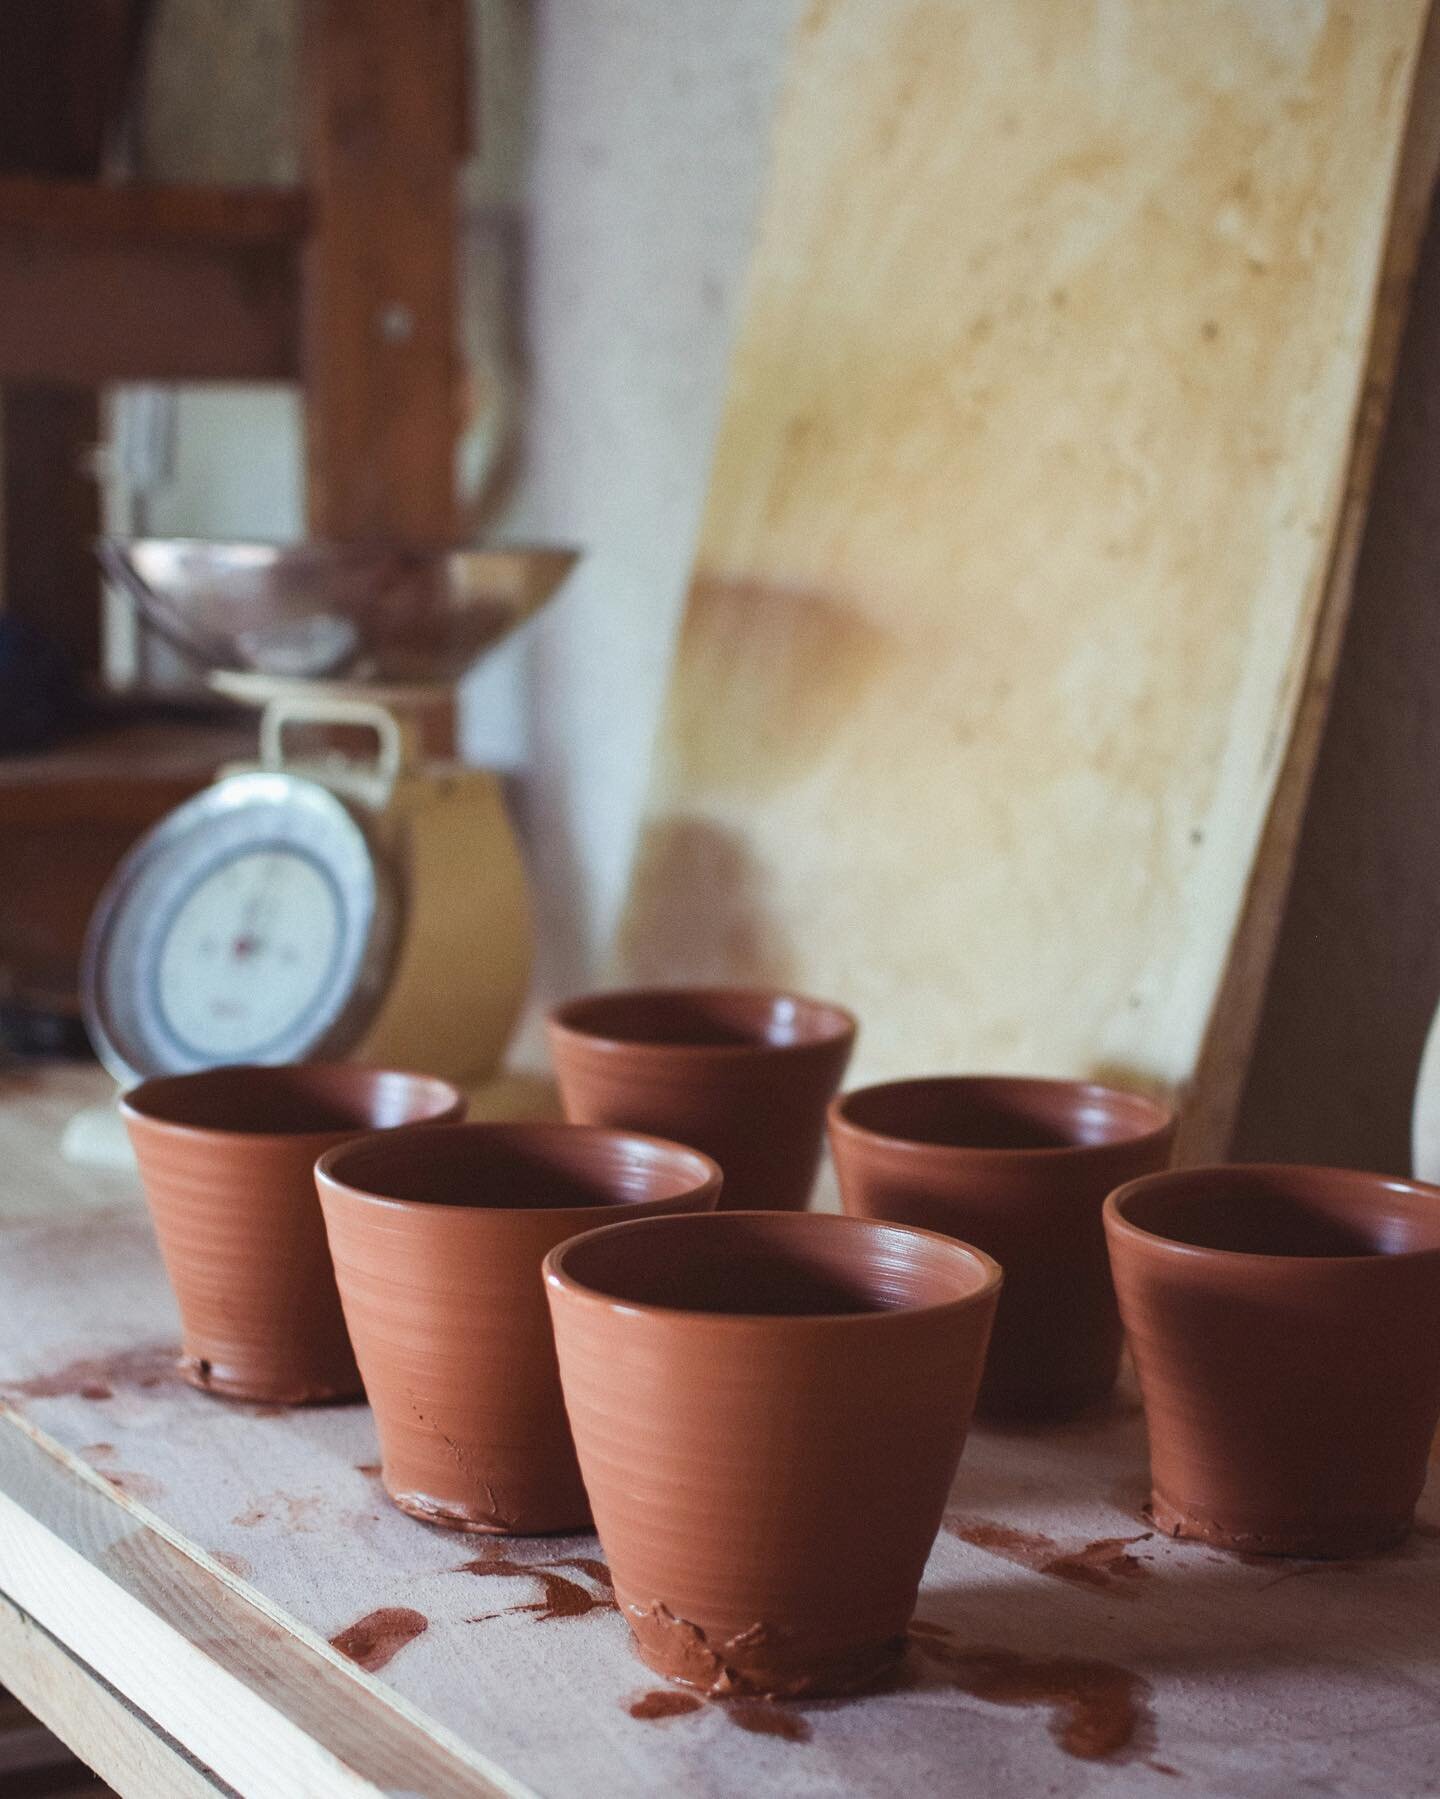 &ldquo;I lived in solitude in the country and noticed how the monotony of a quiet life stimulates the creative mind&quot; - Albert Einstein
.
.
.
.
.
#aquietplace #cornersofmyhome #makingcups #atelierpoterie #creativelifestyle #ruralliving #slowlivin